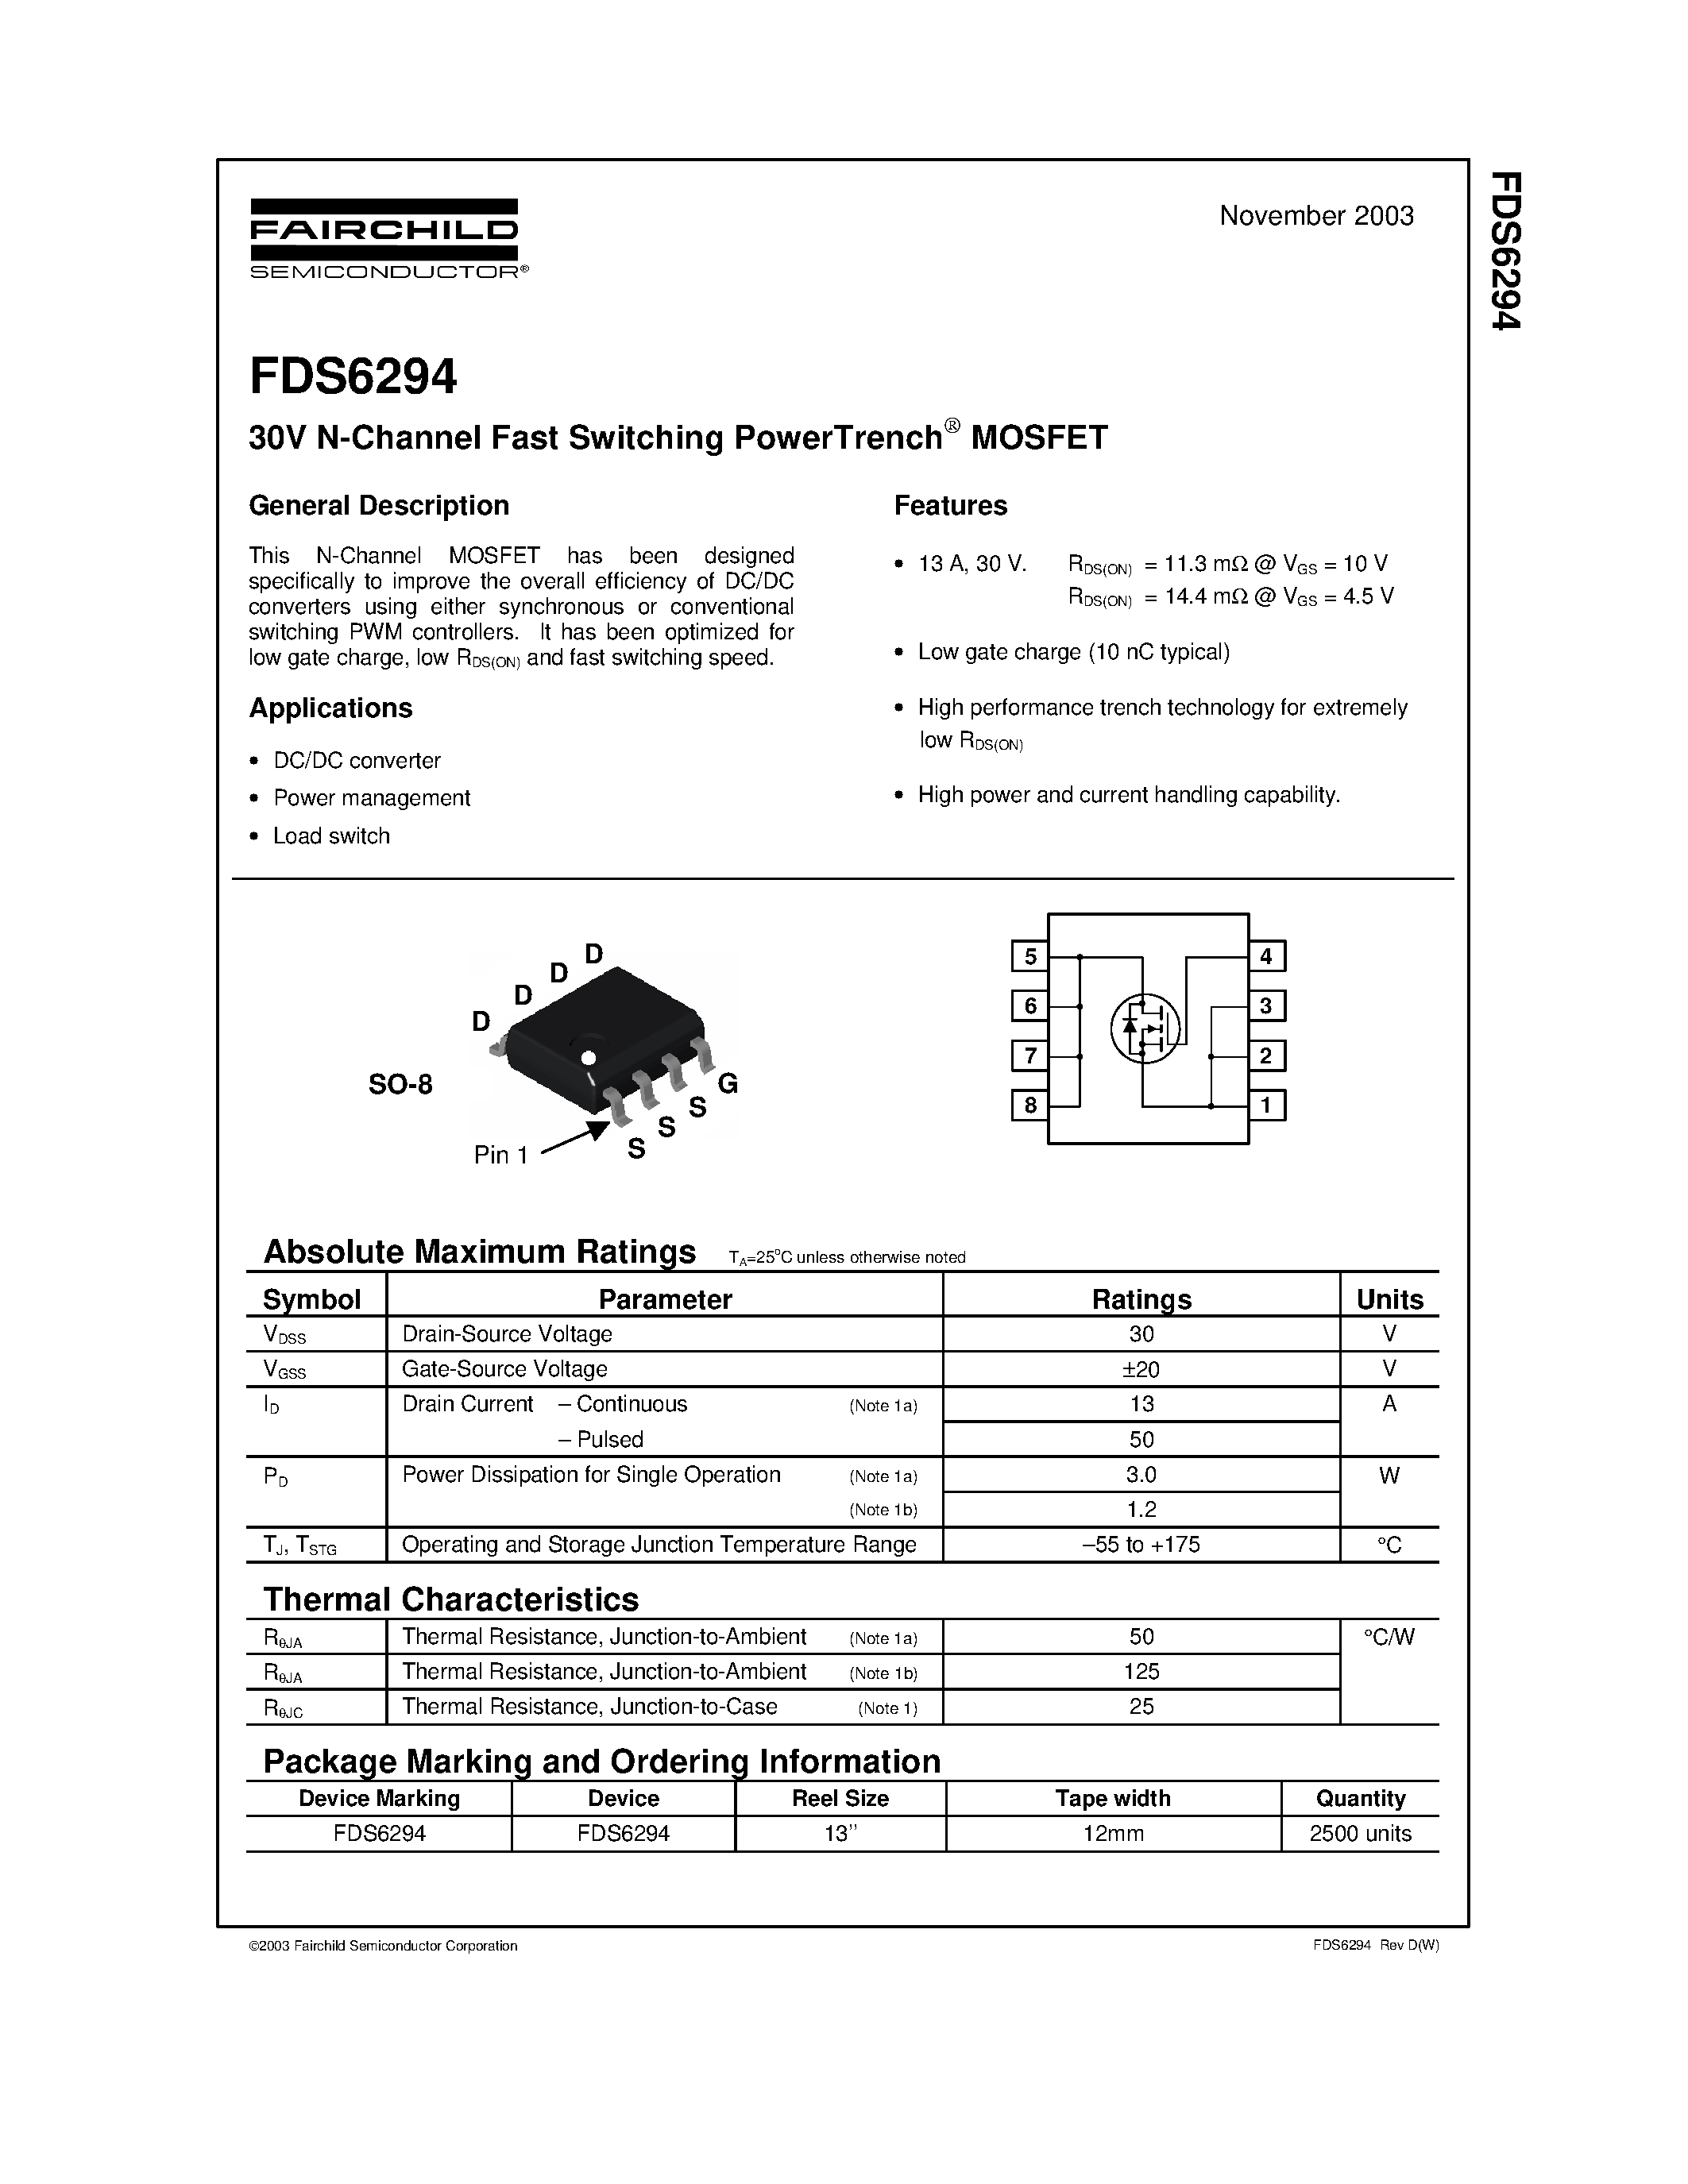 Даташит FDS6294 - 30V N-Channel Fast Switching PowerTrench MOSFET страница 1